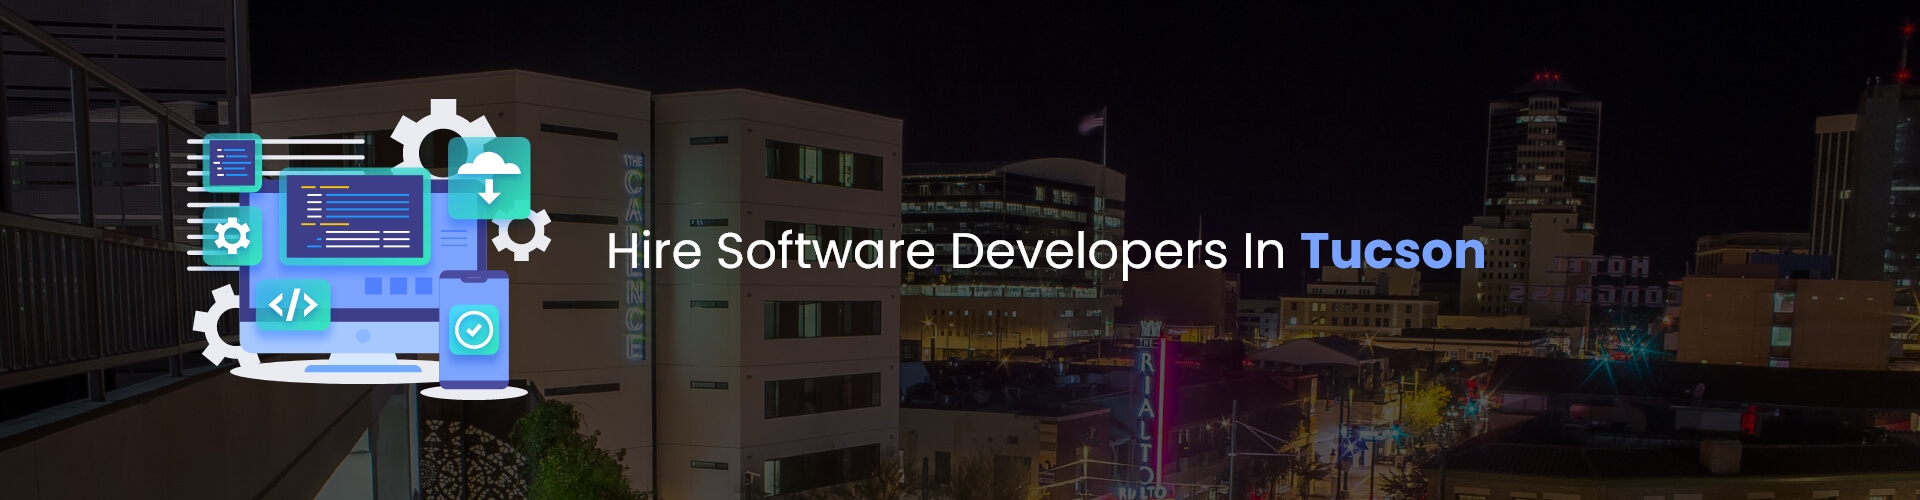 hire software developers in tucson